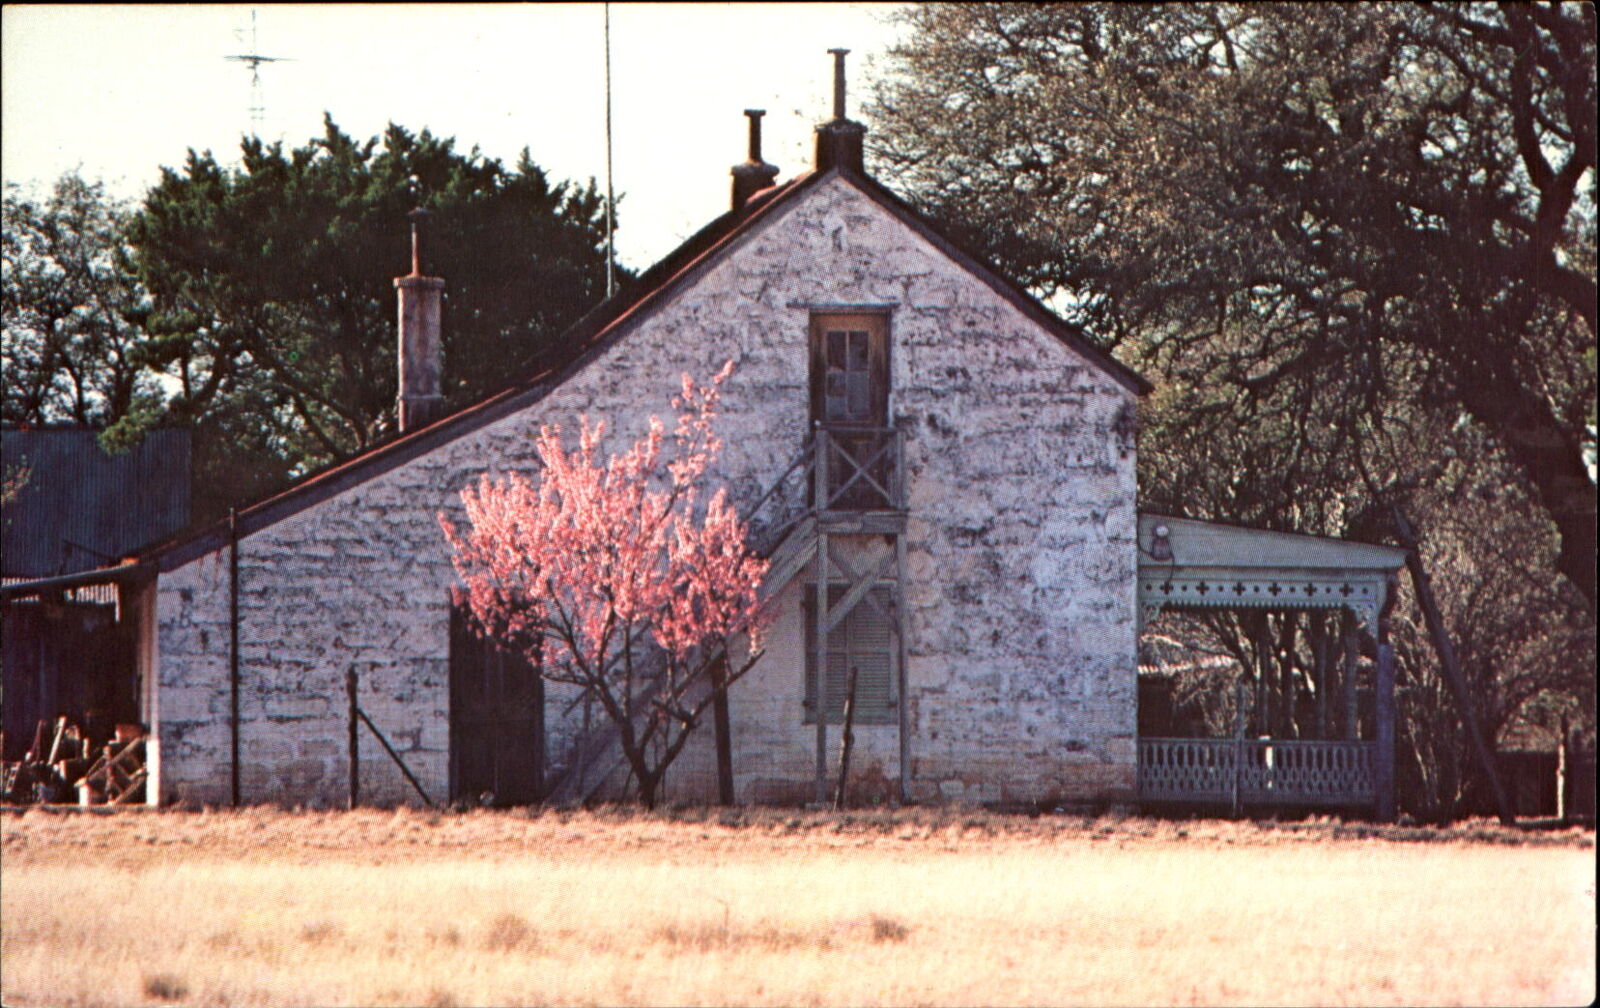 Native Limestone house ~ Texas Hill Country ~ built by German settlers 1840s